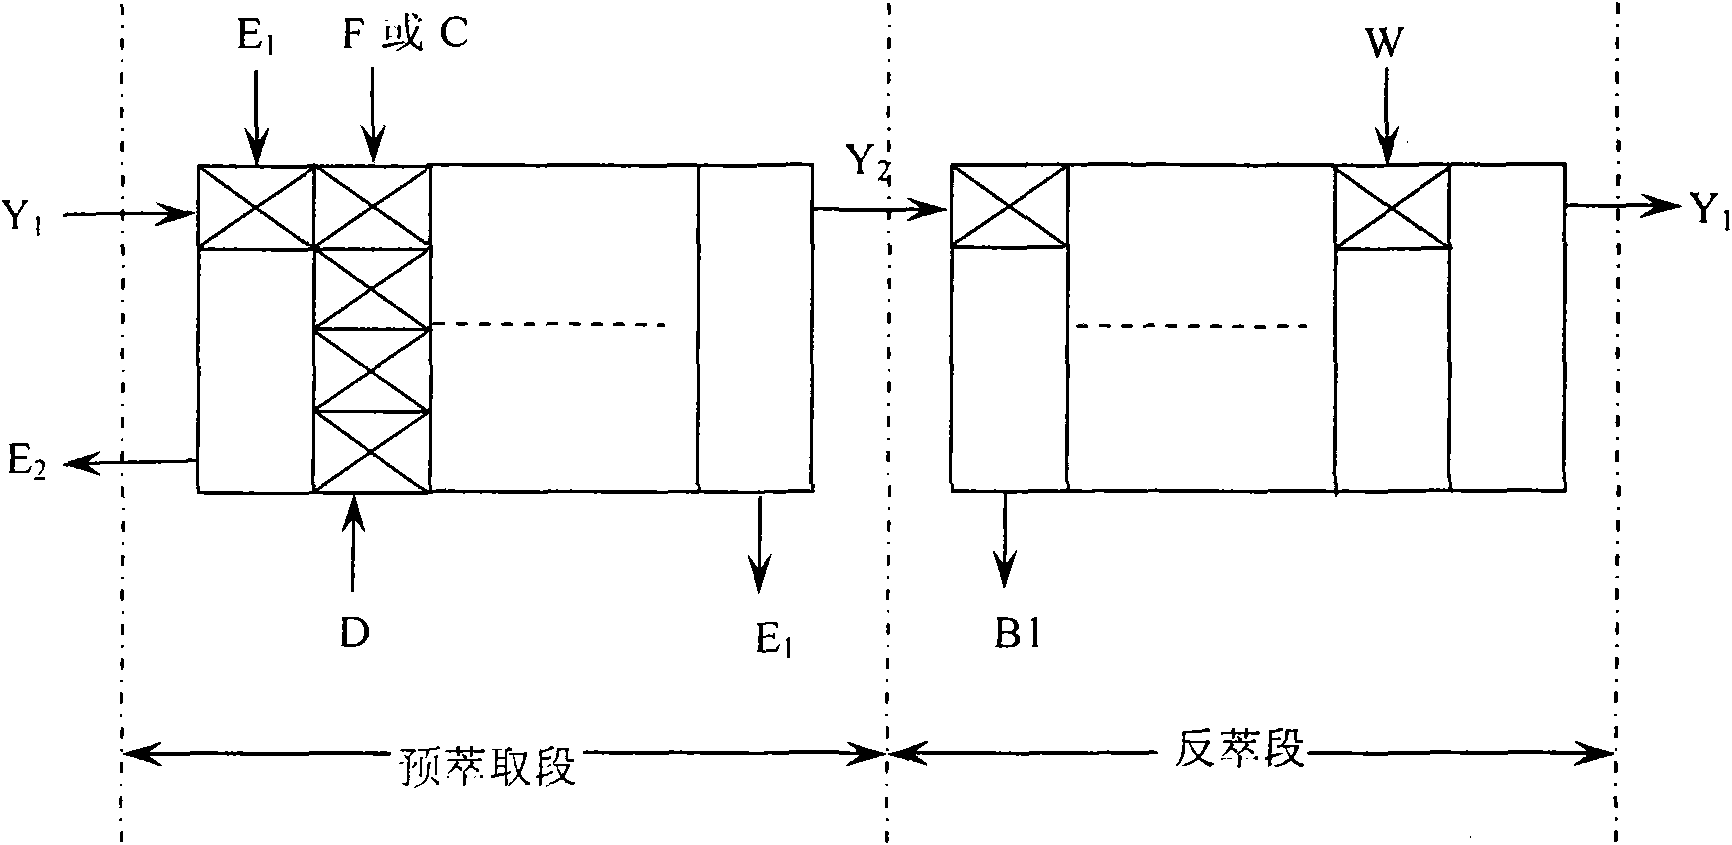 Process for extracting and separating rare-earth elements